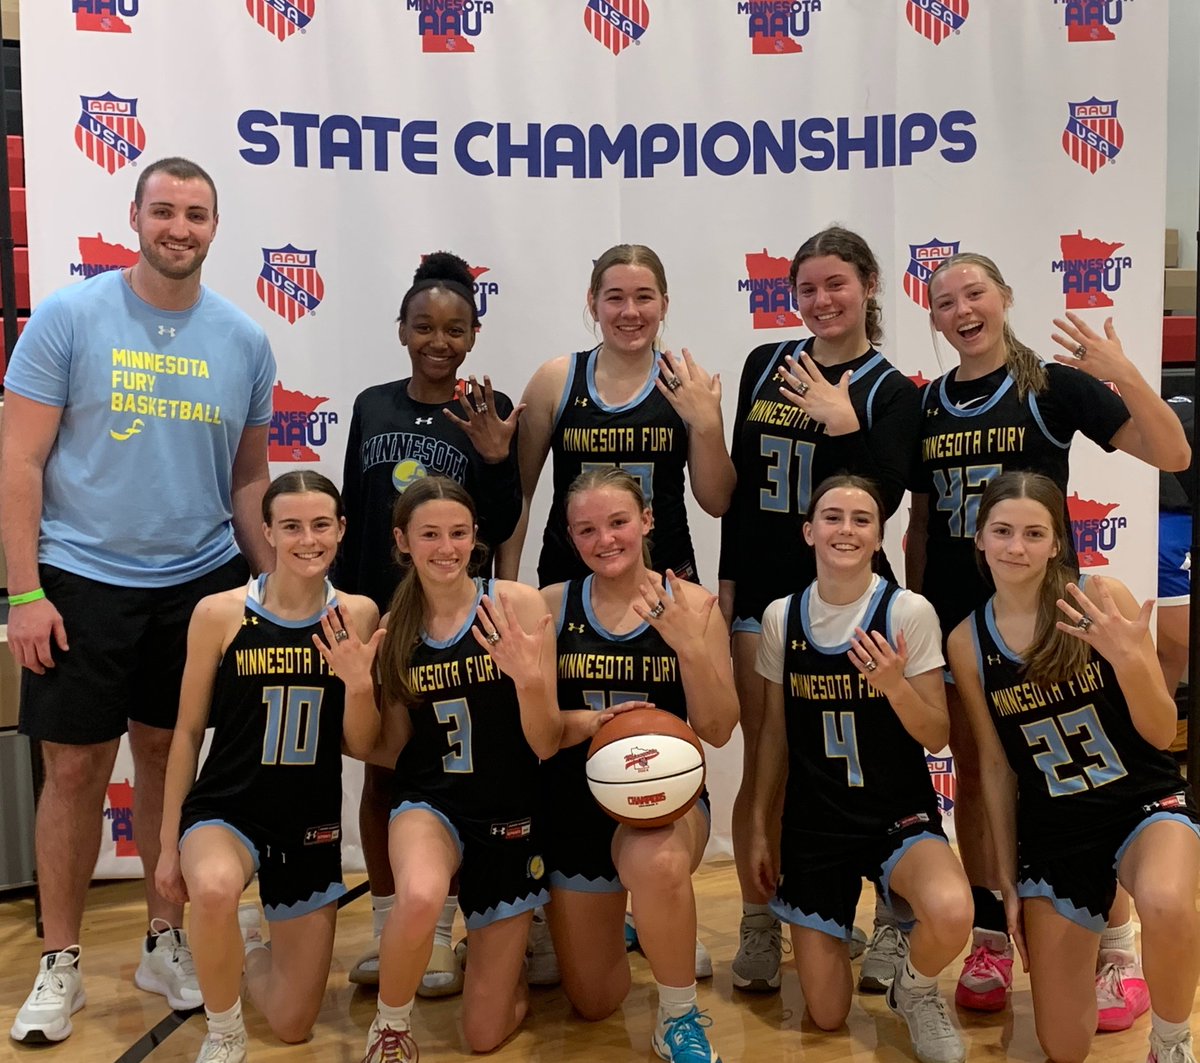 Congrats to our 𝗦𝗧𝗔𝗧𝗘 𝗖𝗛𝗔𝗠𝗣𝗦!

We're so proud of our 2027 team on winning the D2 State Championship this weekend! 👏

#FuryFam | #ThisIsWhyYouFury